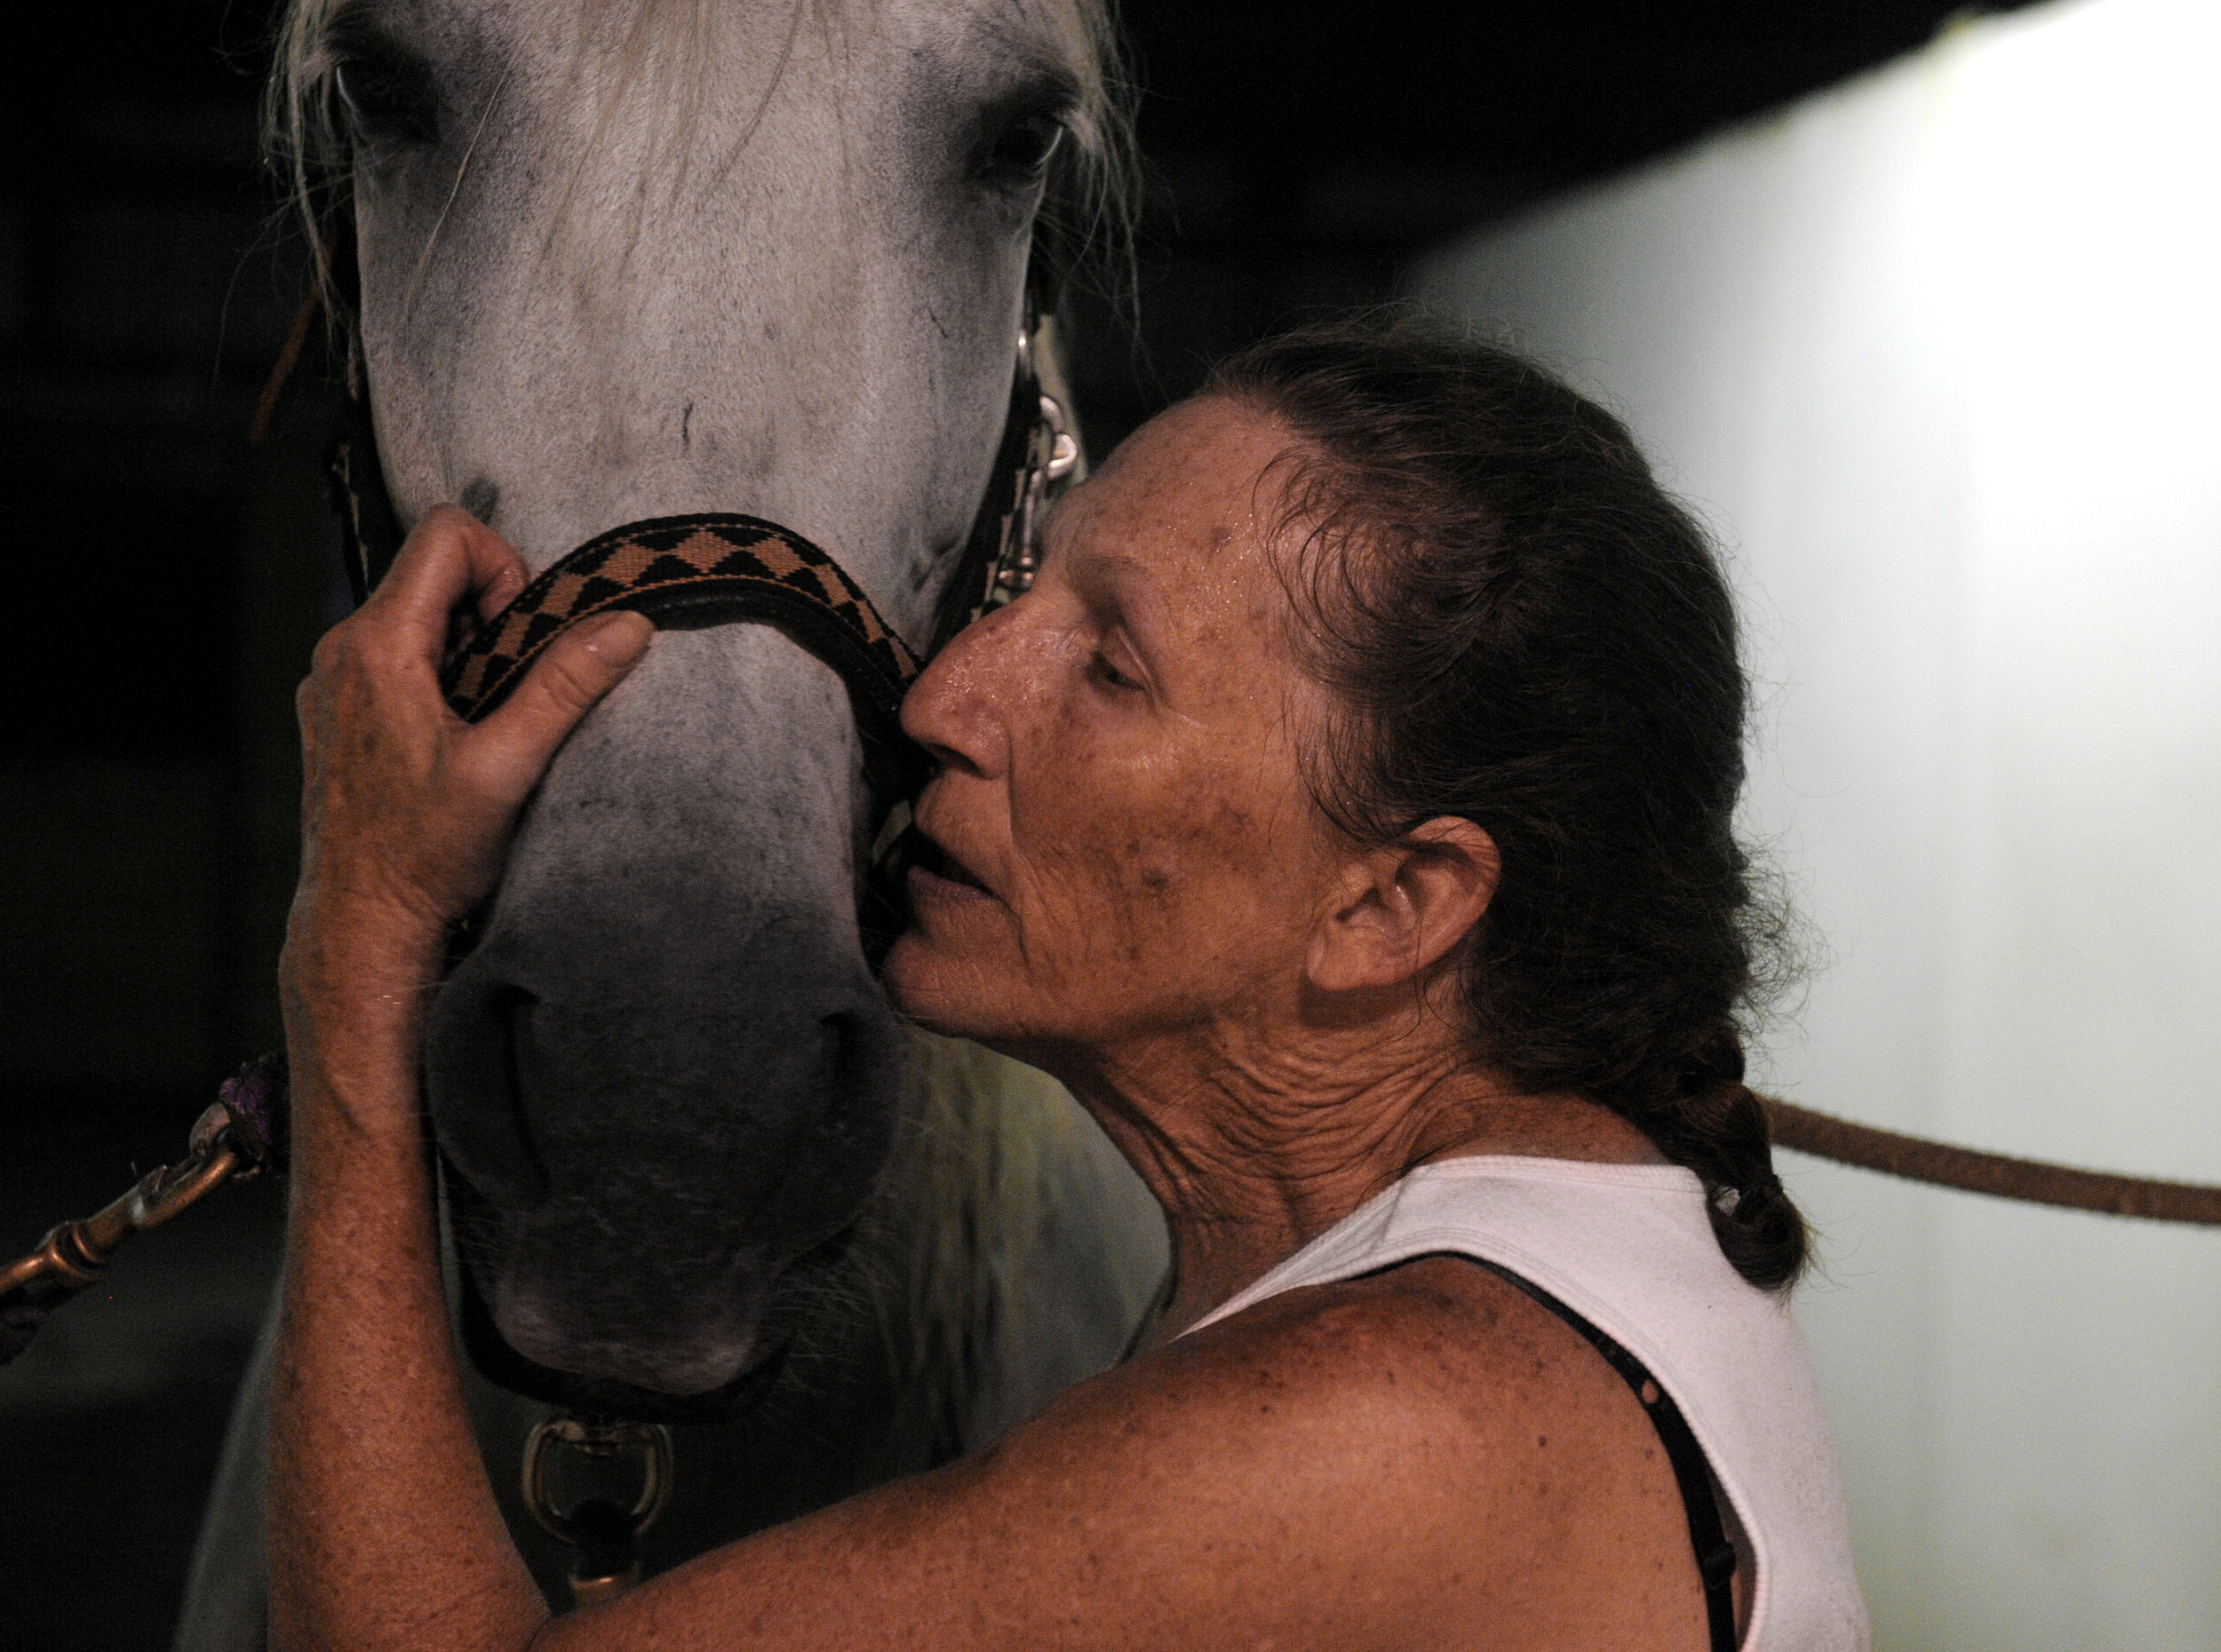  Cecelia Cress of Abingdon kisses and talks to Colada after an evening of riding at Freedom Hills Therapeutic Riding Program in Port Deposit, Maryland on Wednesday, August 17, 2016. Cress,&nbsp;a disabled Air Force veteran, said that horseback riding